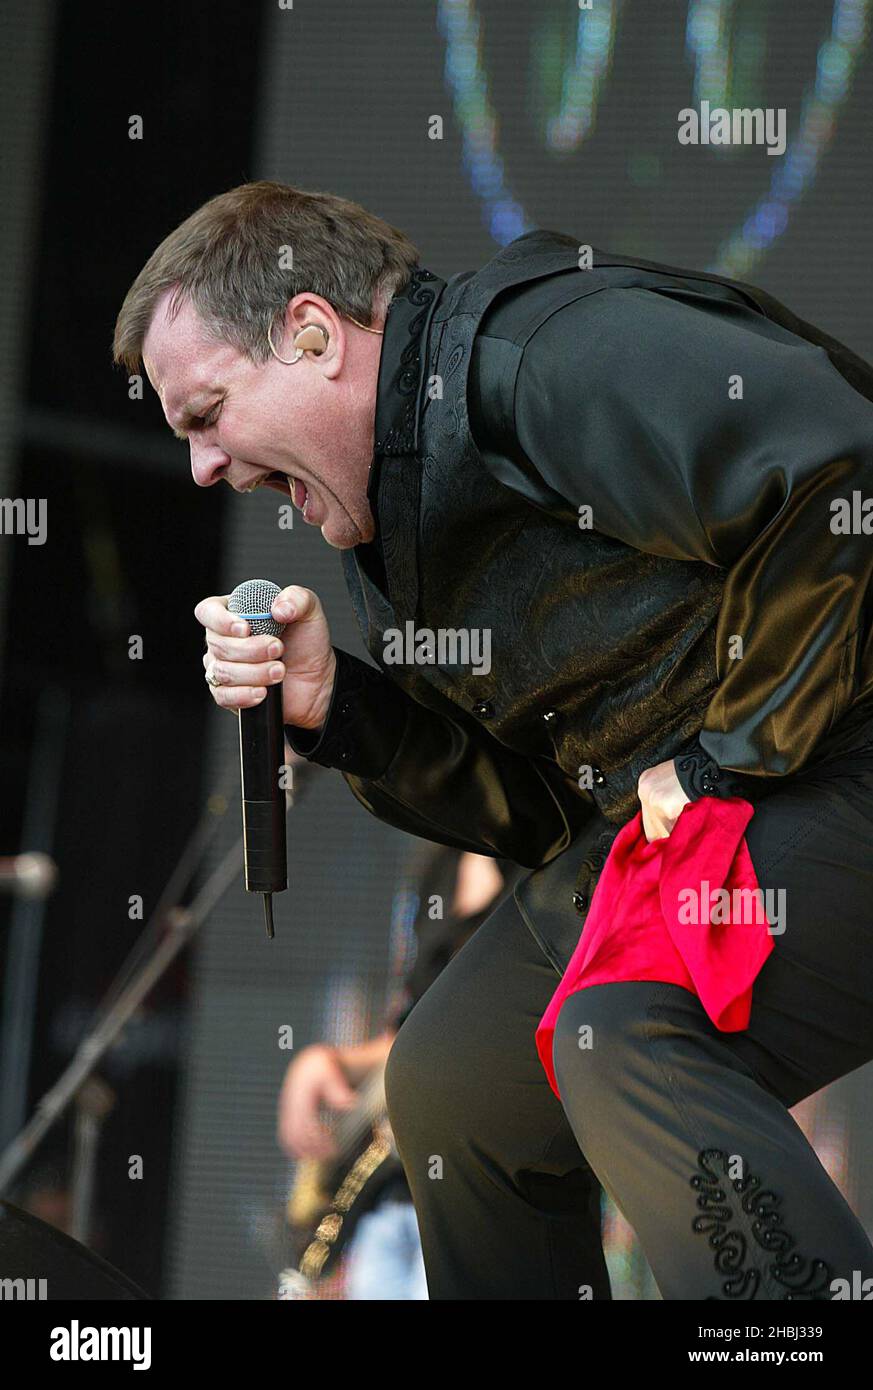 Meat Loaf performing live at the Capital FM Prince's Trust Party in the Park at Hyde Park London. Half length. Stock Photo